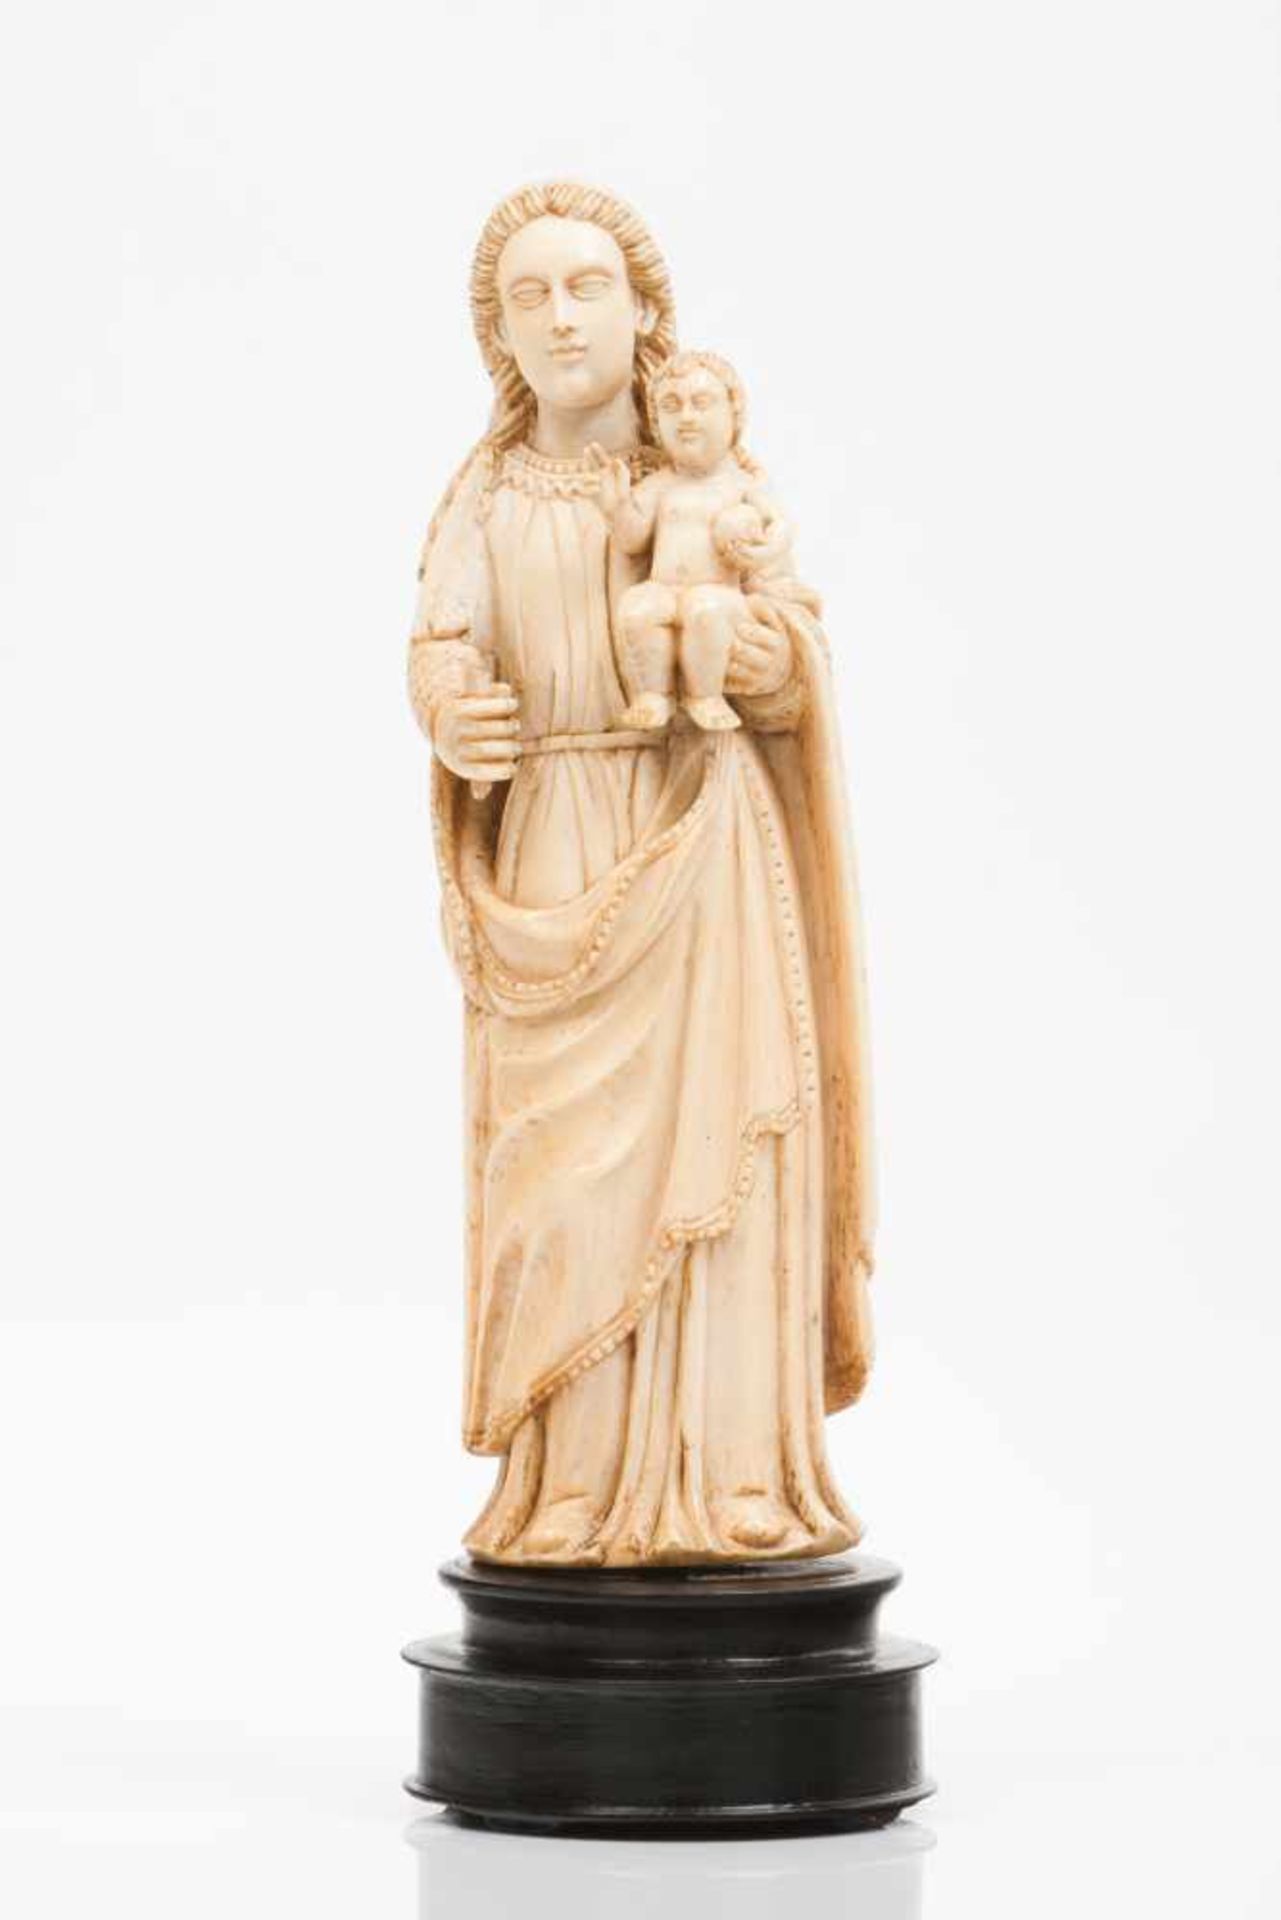 Our Lady with the ChildIvory Indo-Portuguese sculptureEbonized wood base18th century(small losses